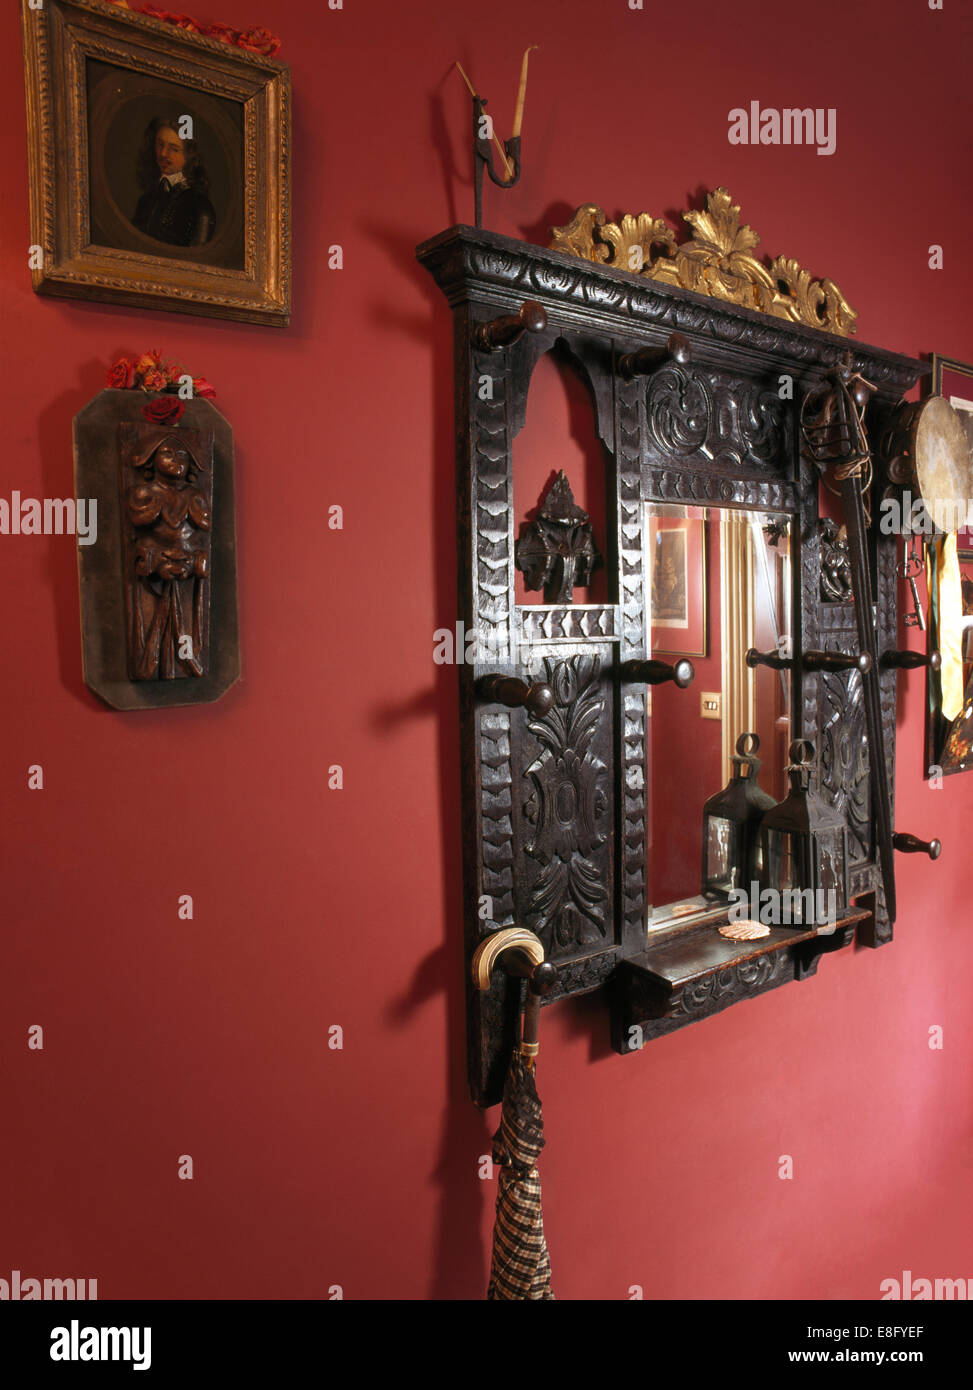 Ornate Victorian mirror and small wooden carving on red wall Stock Photo